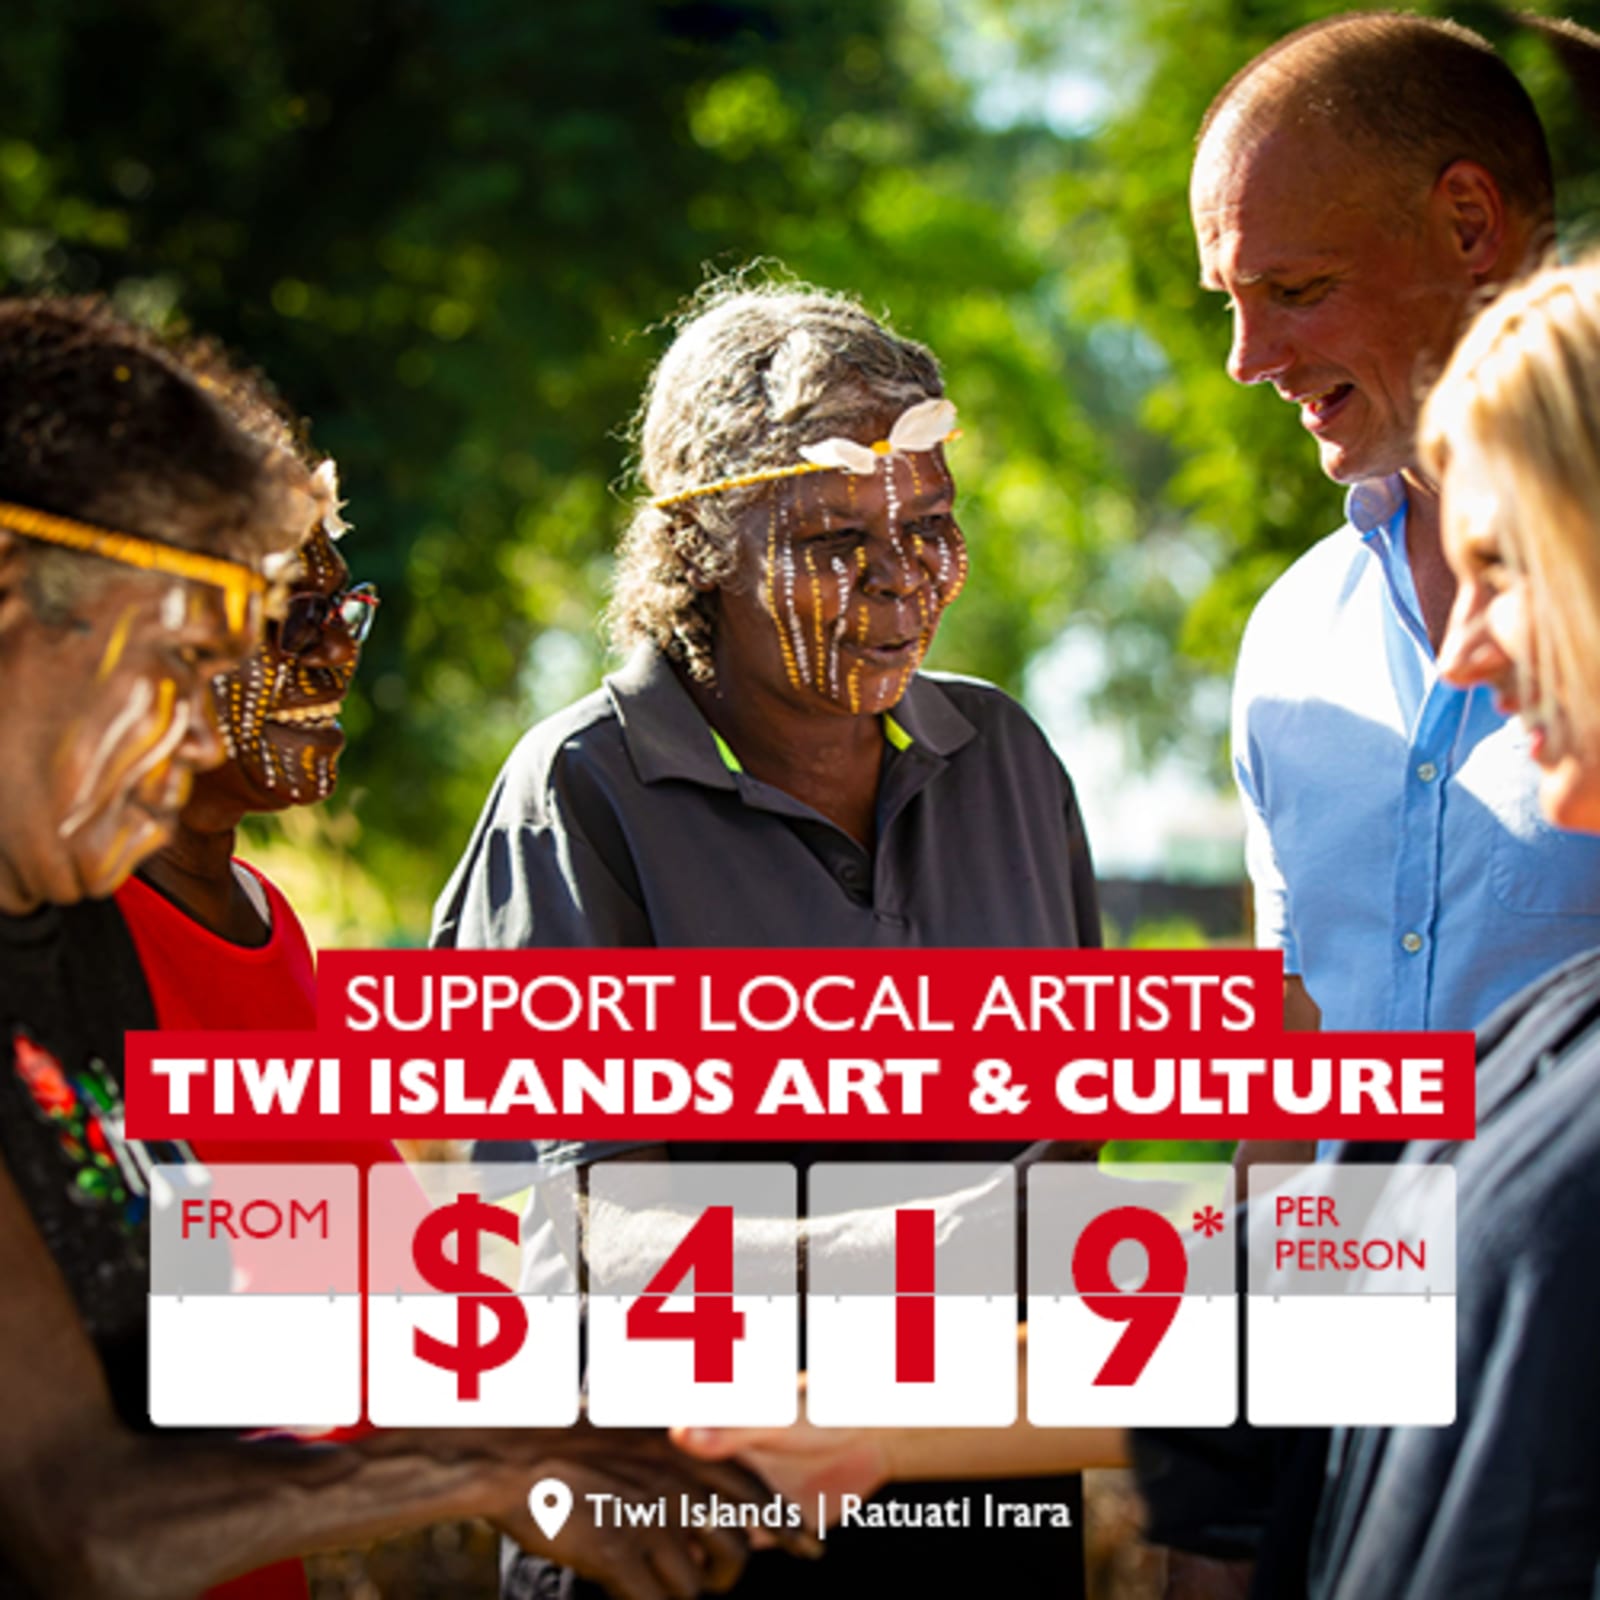 Support local artists | Tiwi islands art & culture from $419* per person